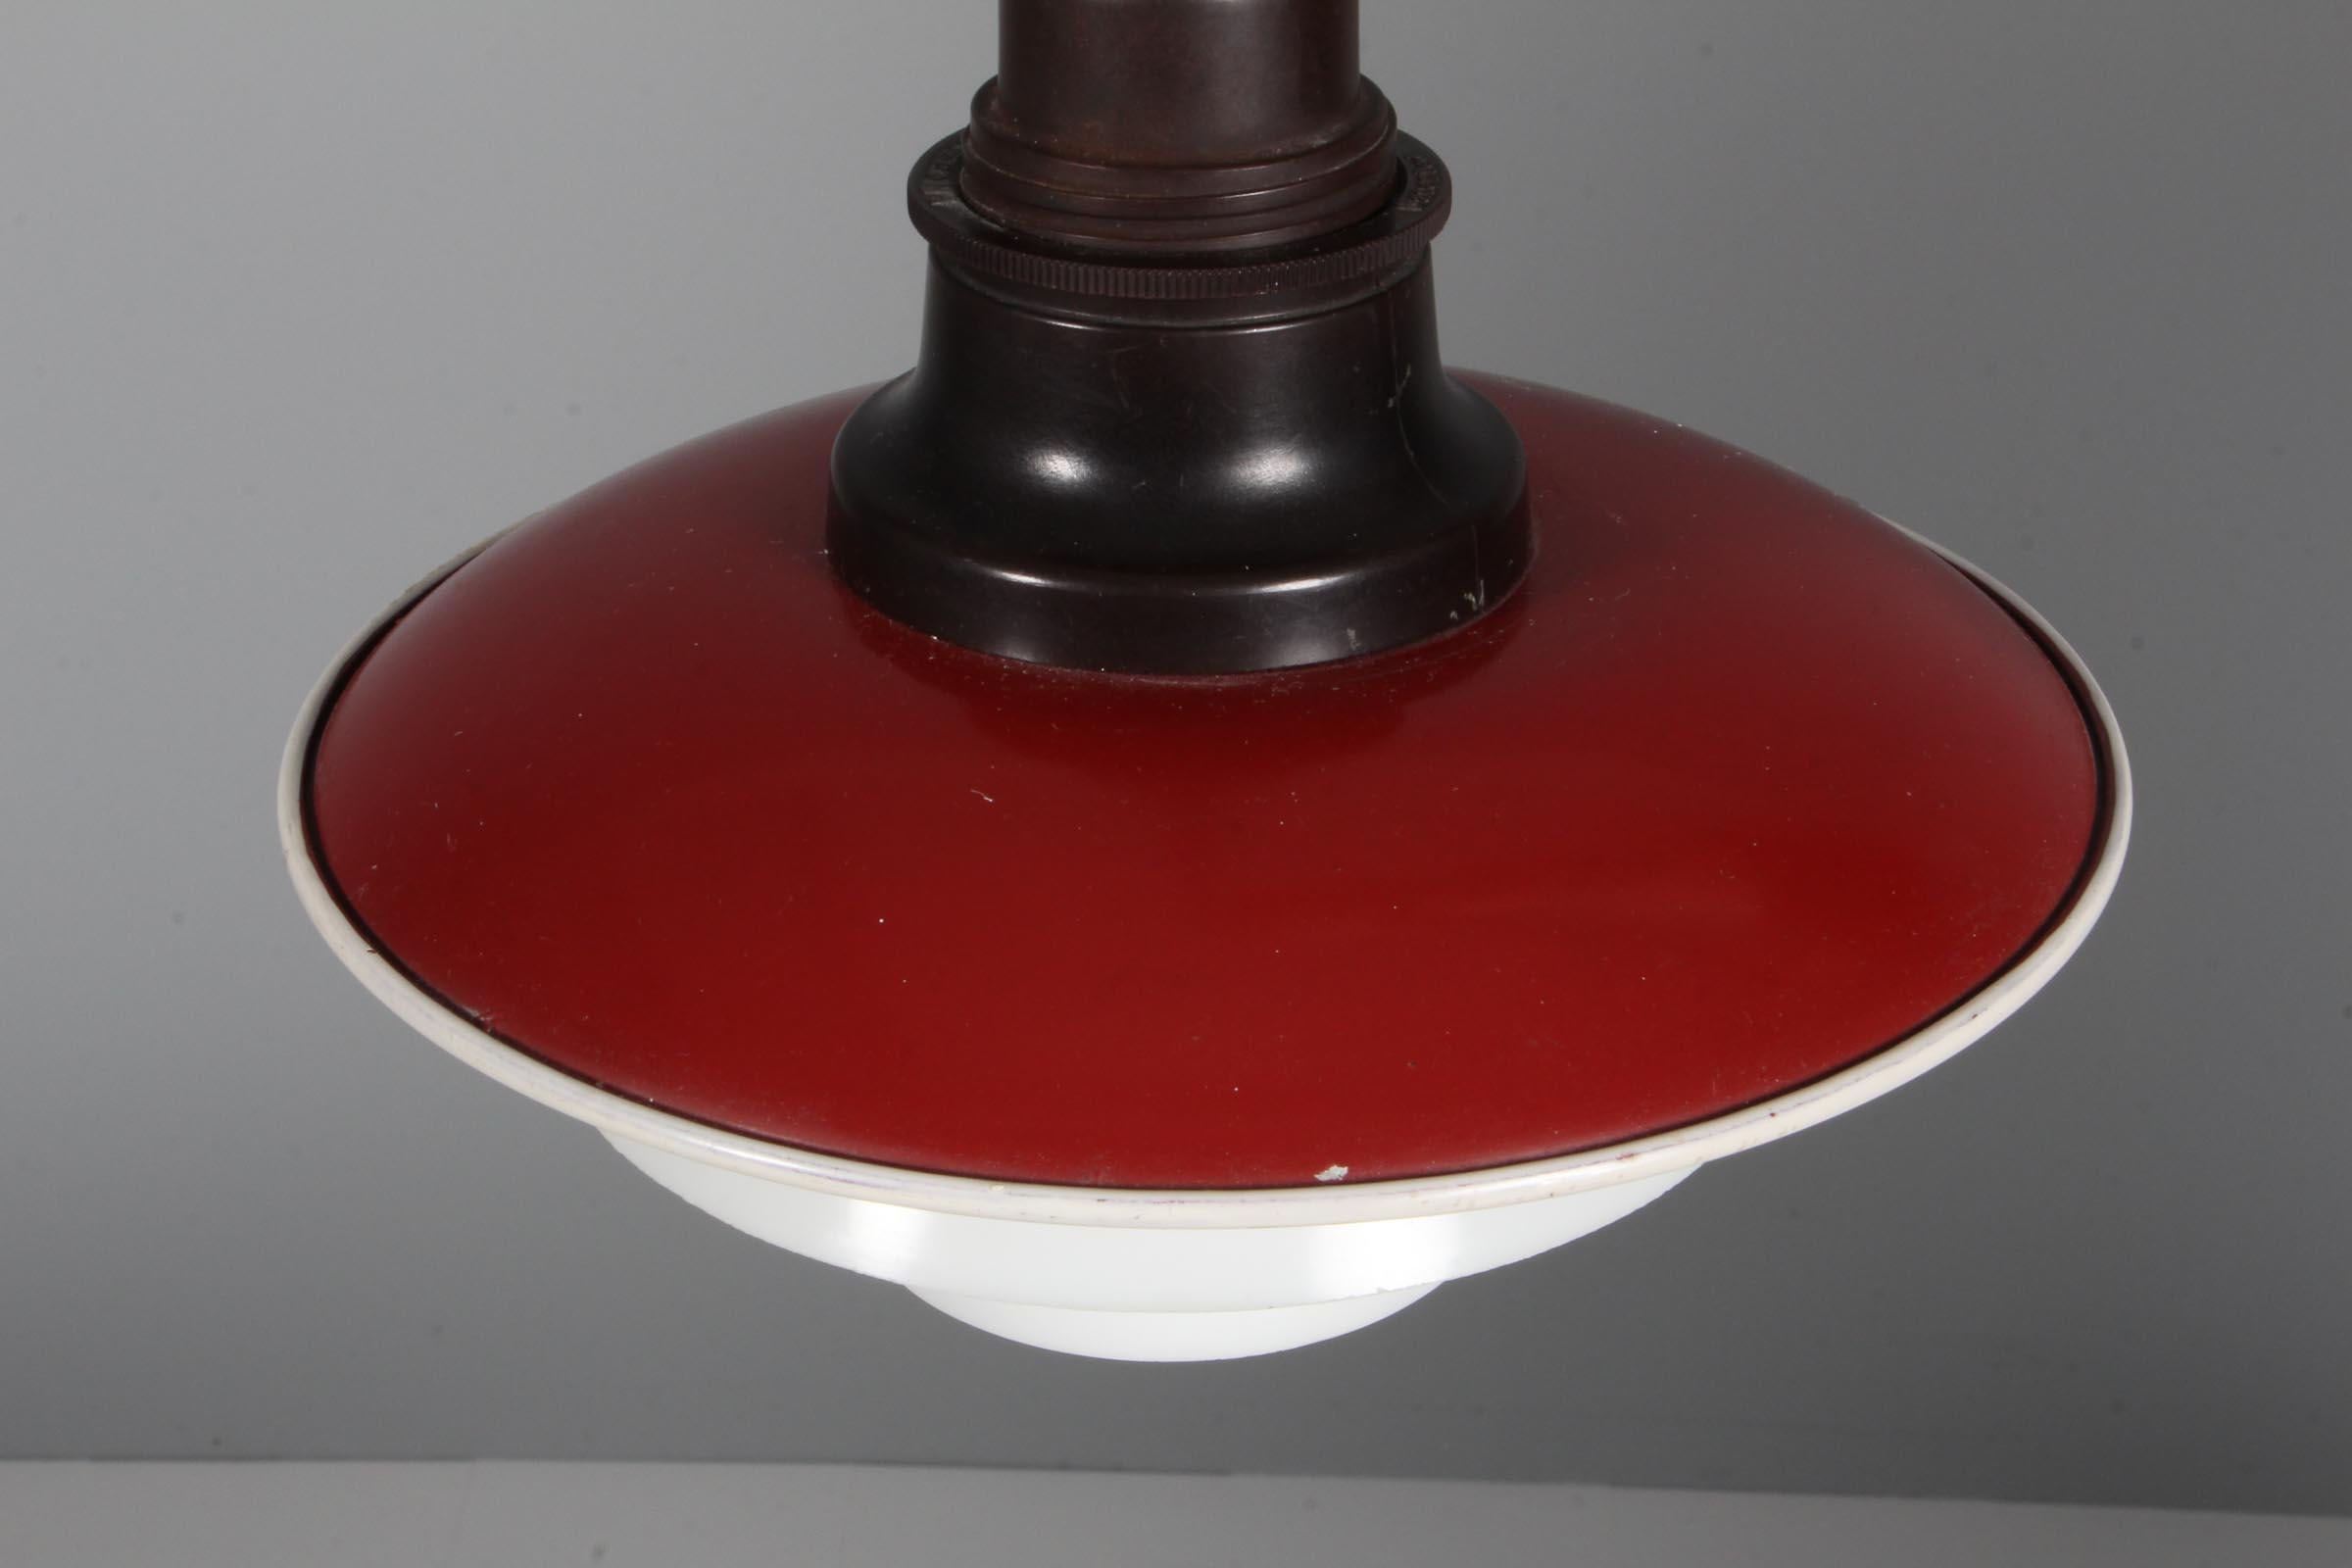 Poul Henningsen PH 2/2 pendant lamp. Shade of white and red laquered copper. Middle and bottom shade of frosted glass. 

Marked Patented, made by Louis poulsen in the 1930s.